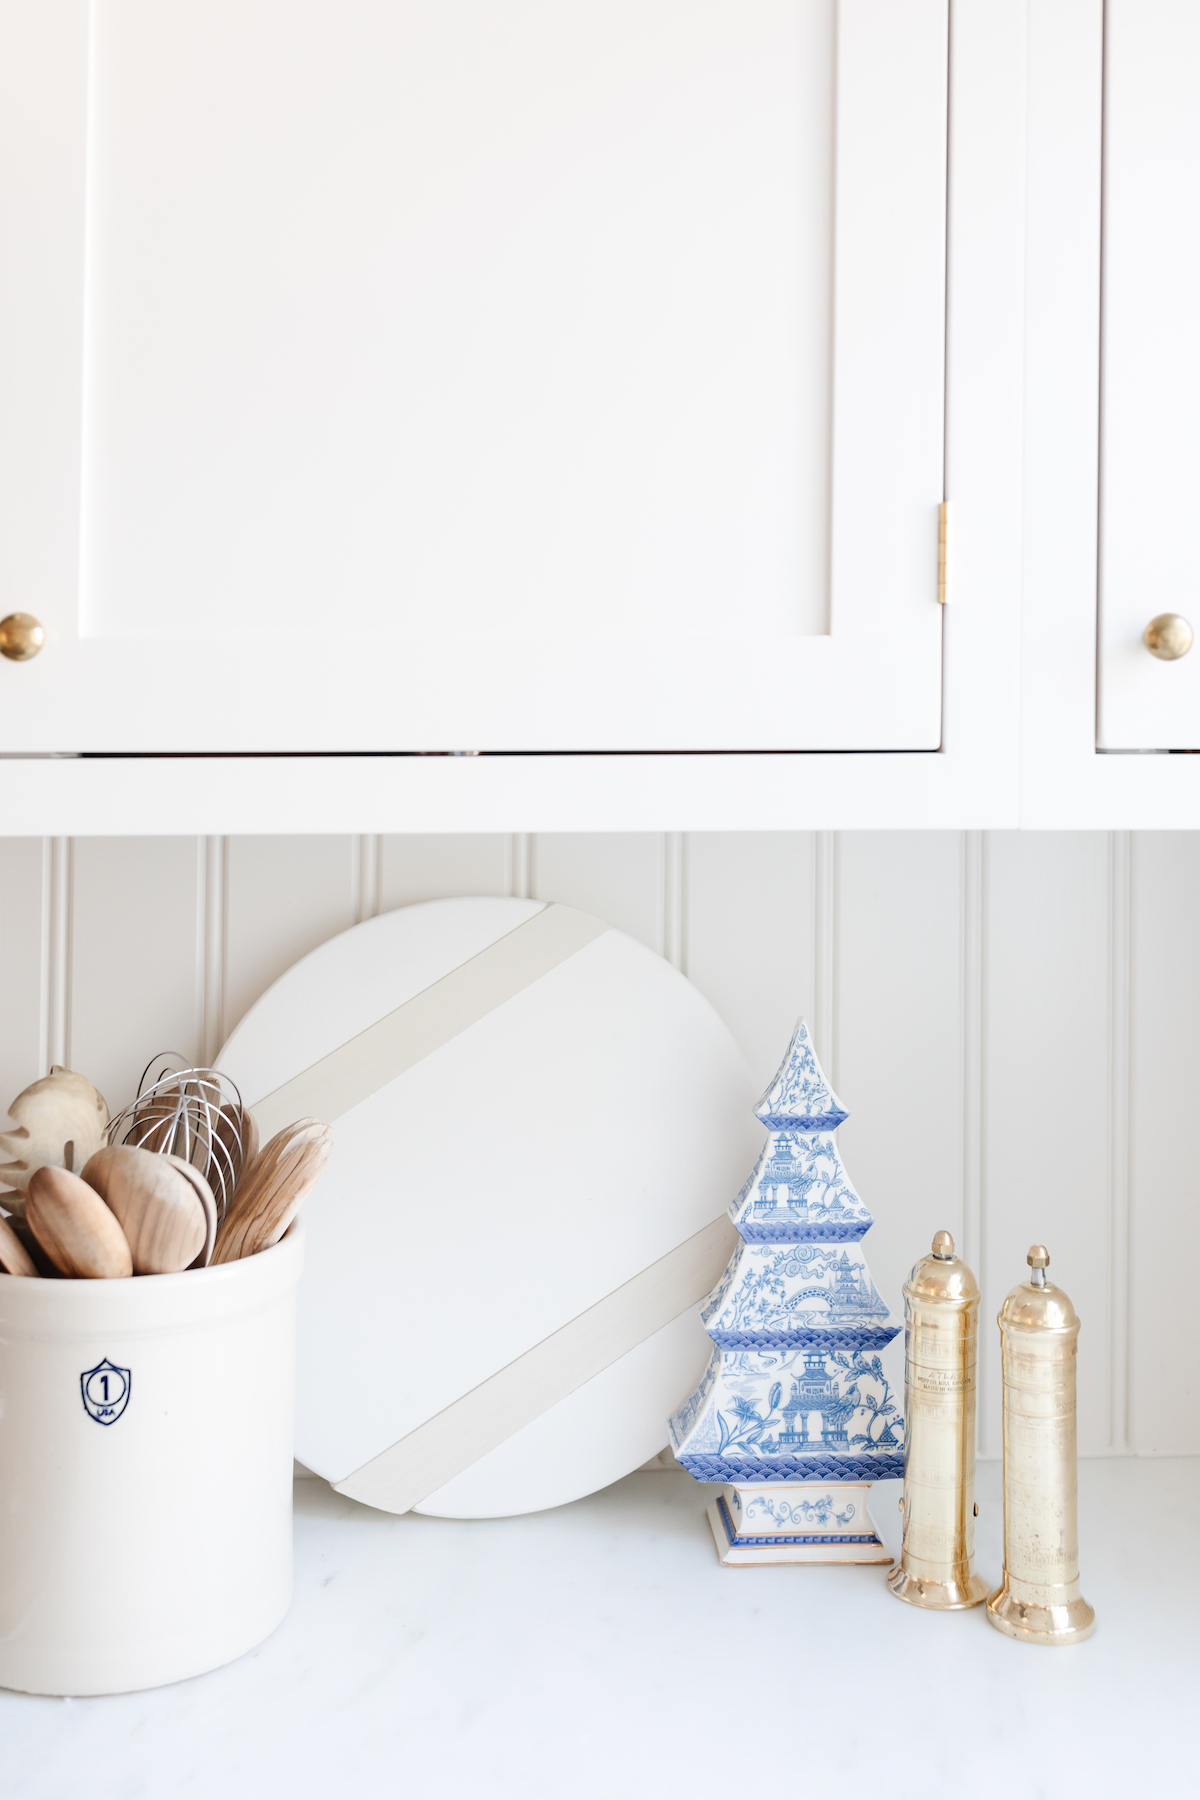 A white kitchen counter with white cabinets and white objects filled with kitchen gifts.